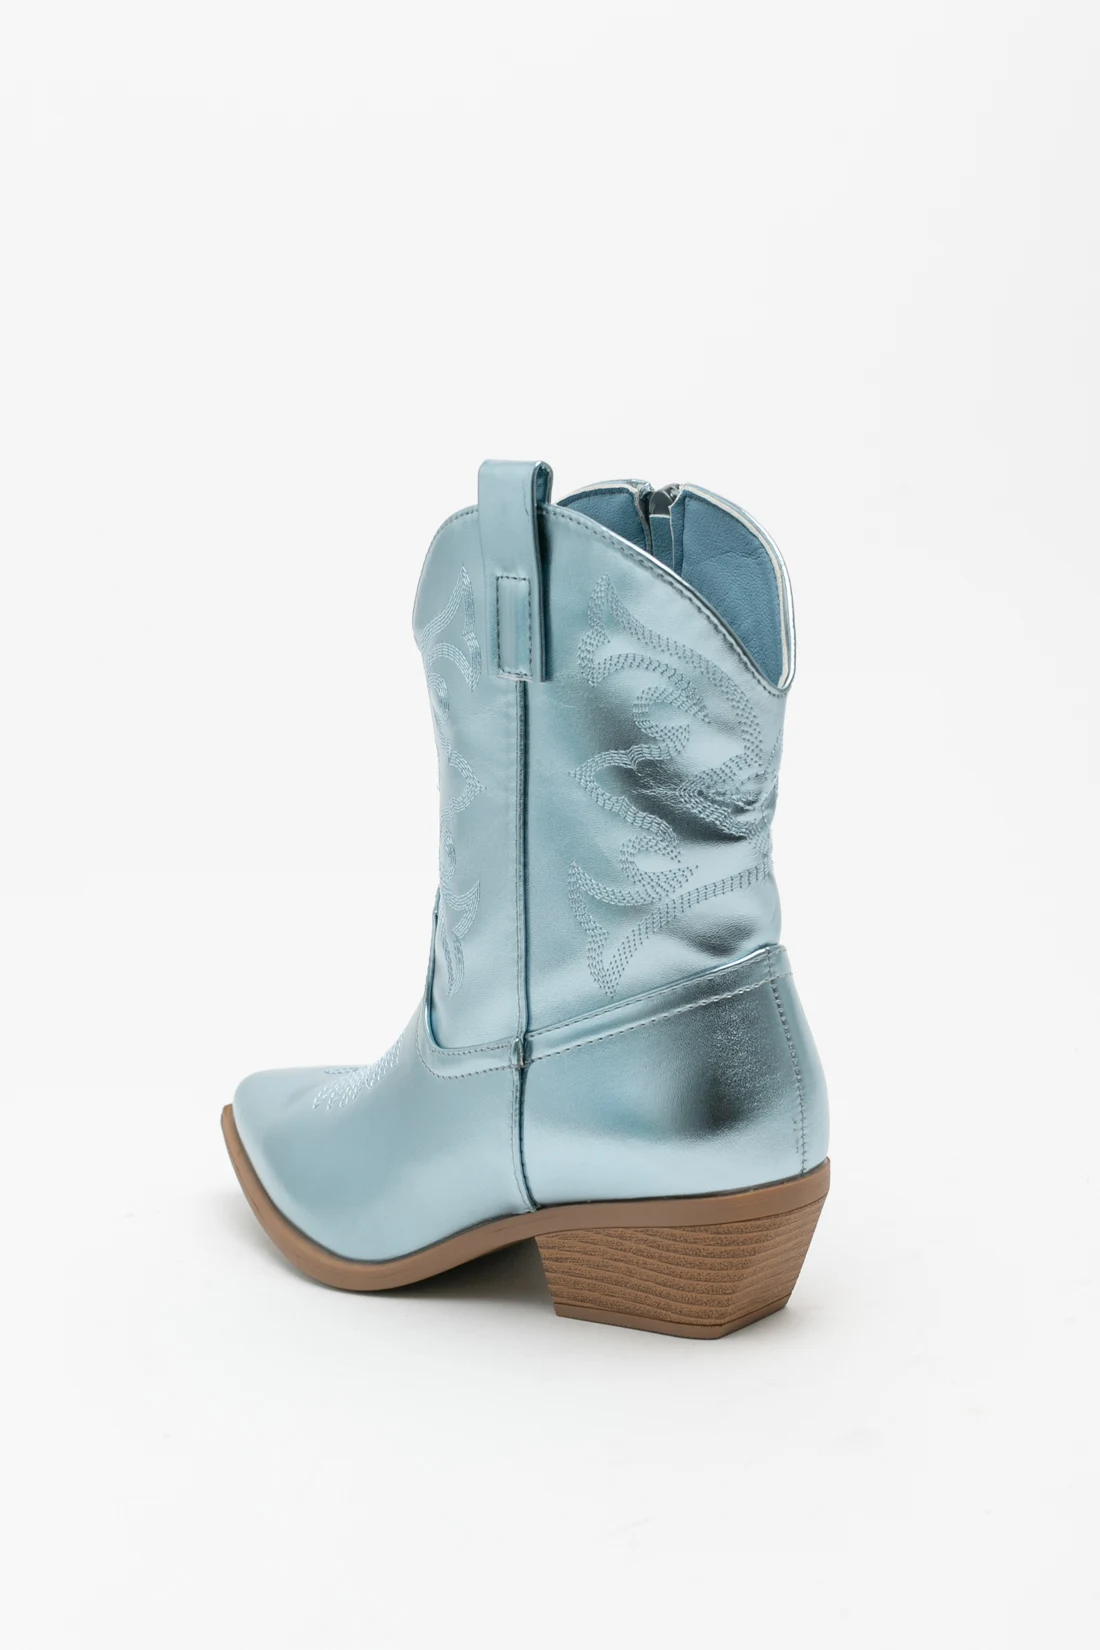 LOW BANYO BOOT - BLUE